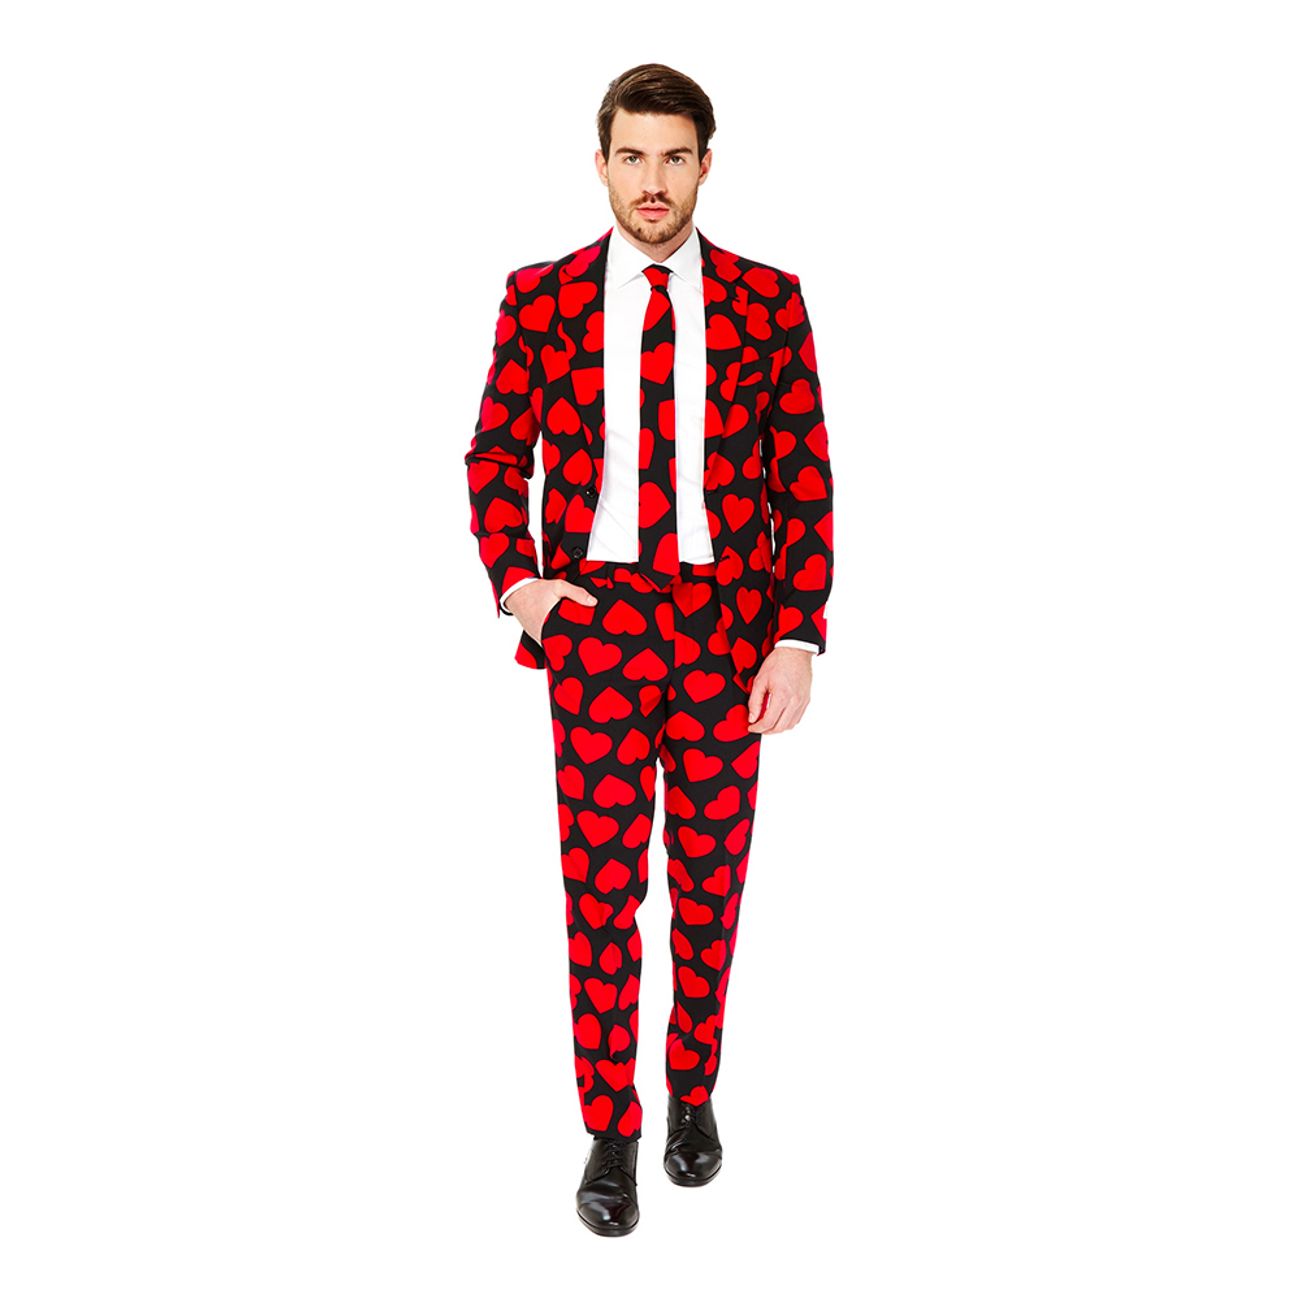 opposuits-king-of-hearts-kostym-1